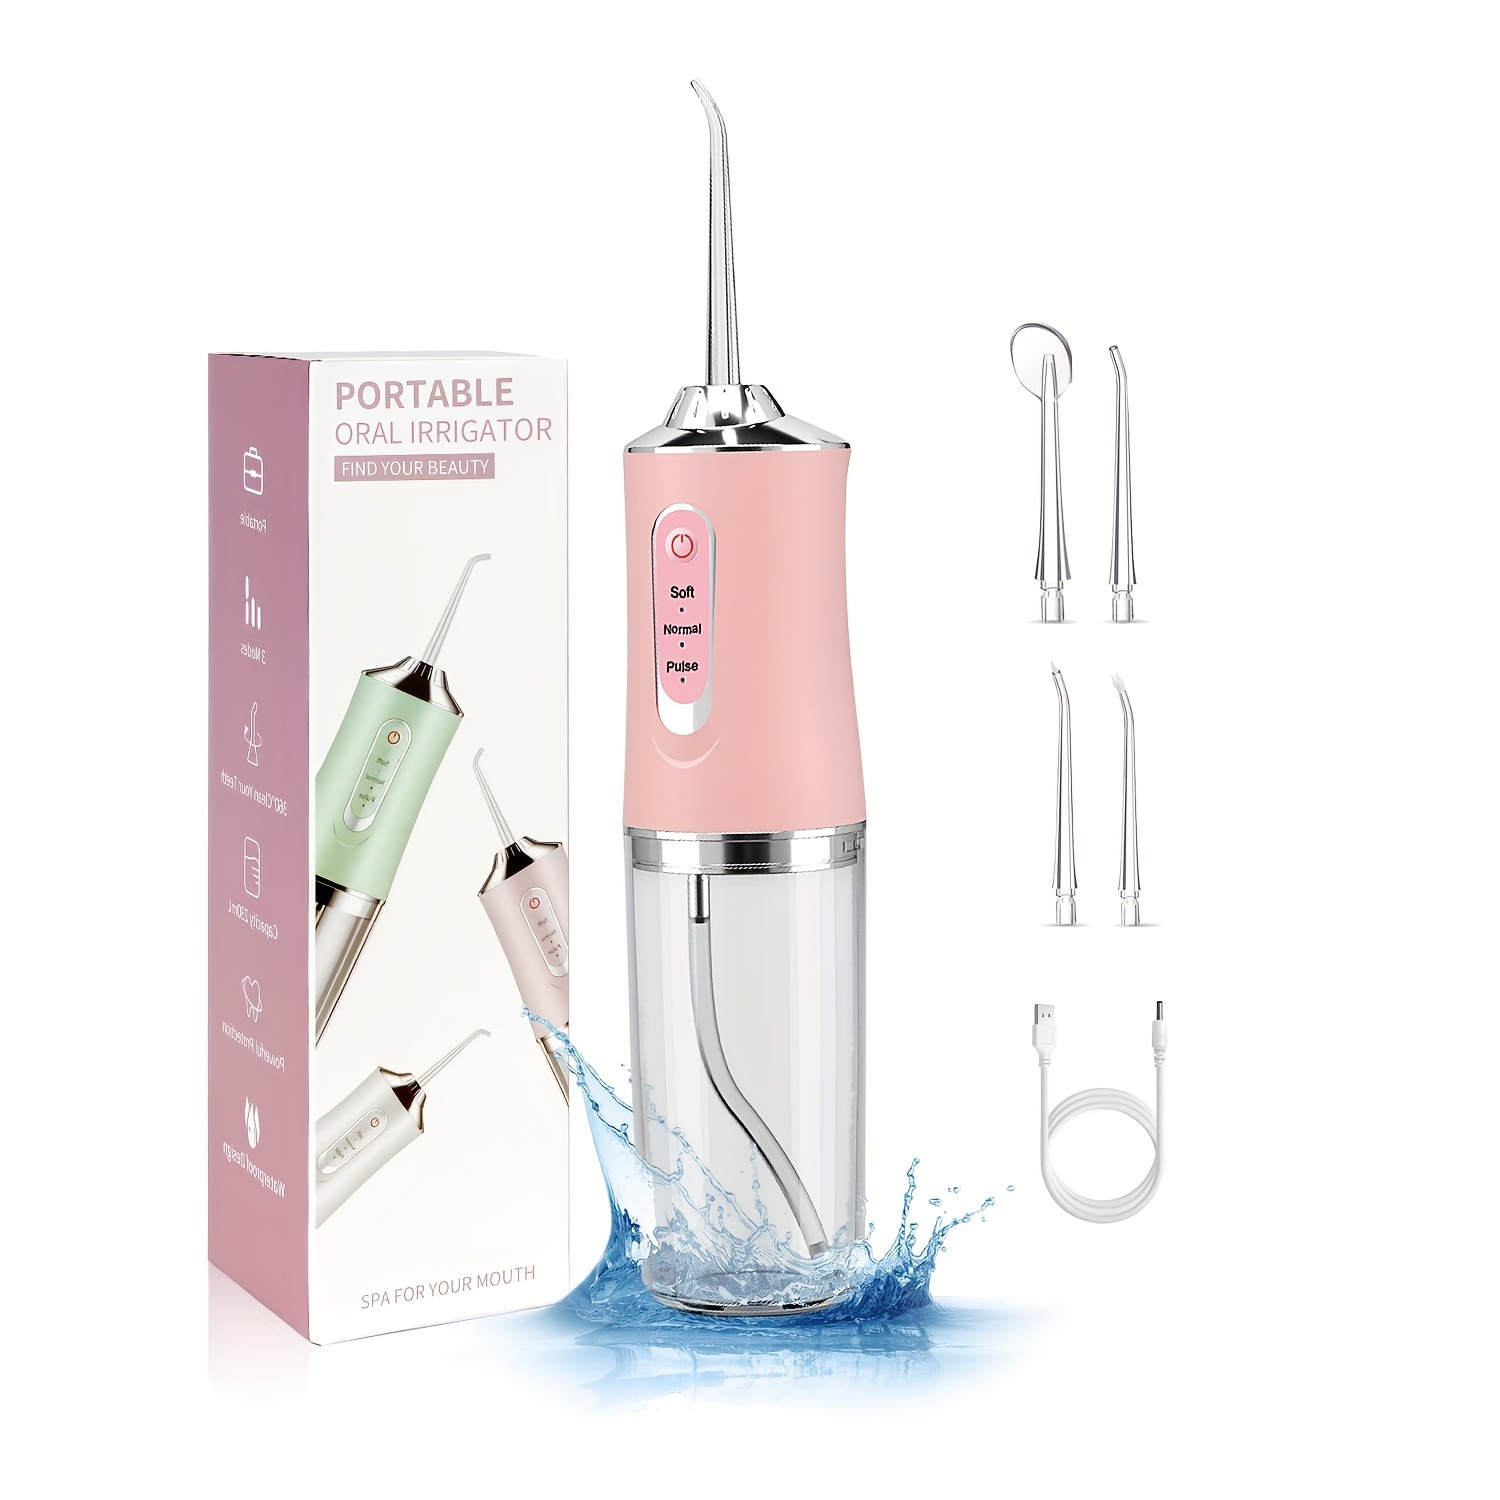 

A Compact 4 Heads Oral Irrigator That Can Be Charged Via Usb, Providing Excellent Oral Care